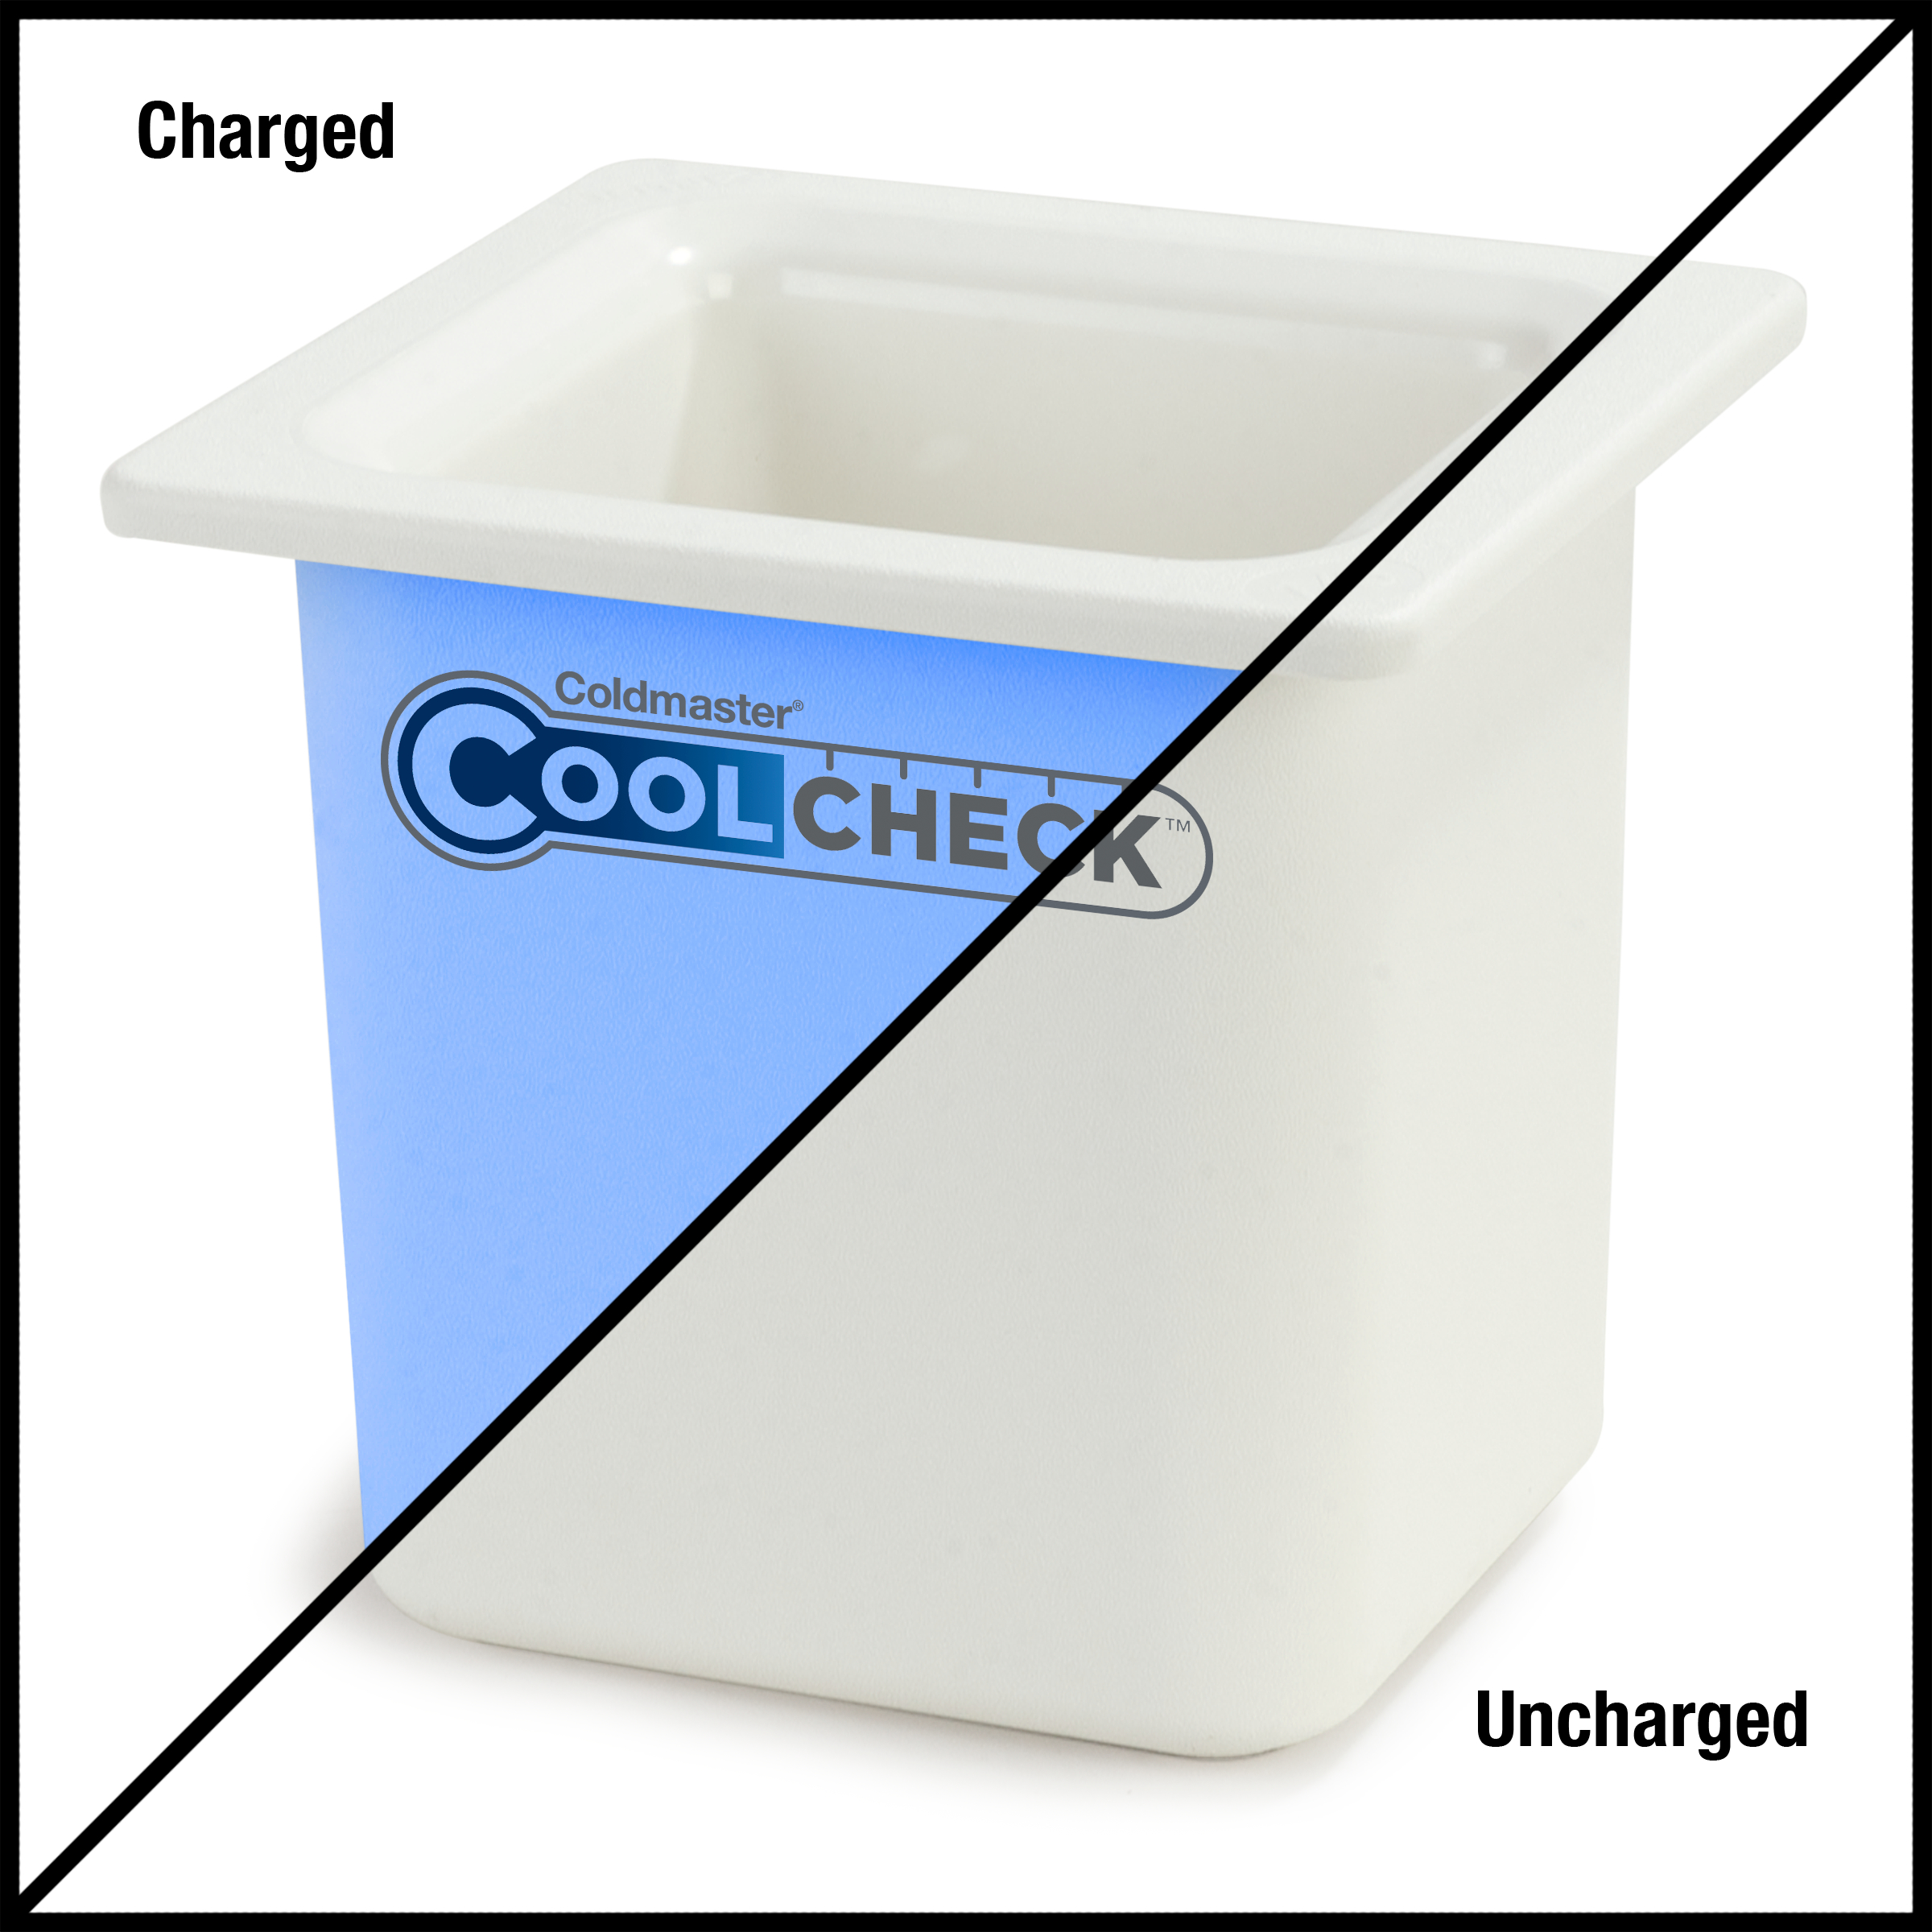 Coldmaster CoolCheck 6 D Sixth-size High Capacity Food Pan 1.7 qt  - White/Blue